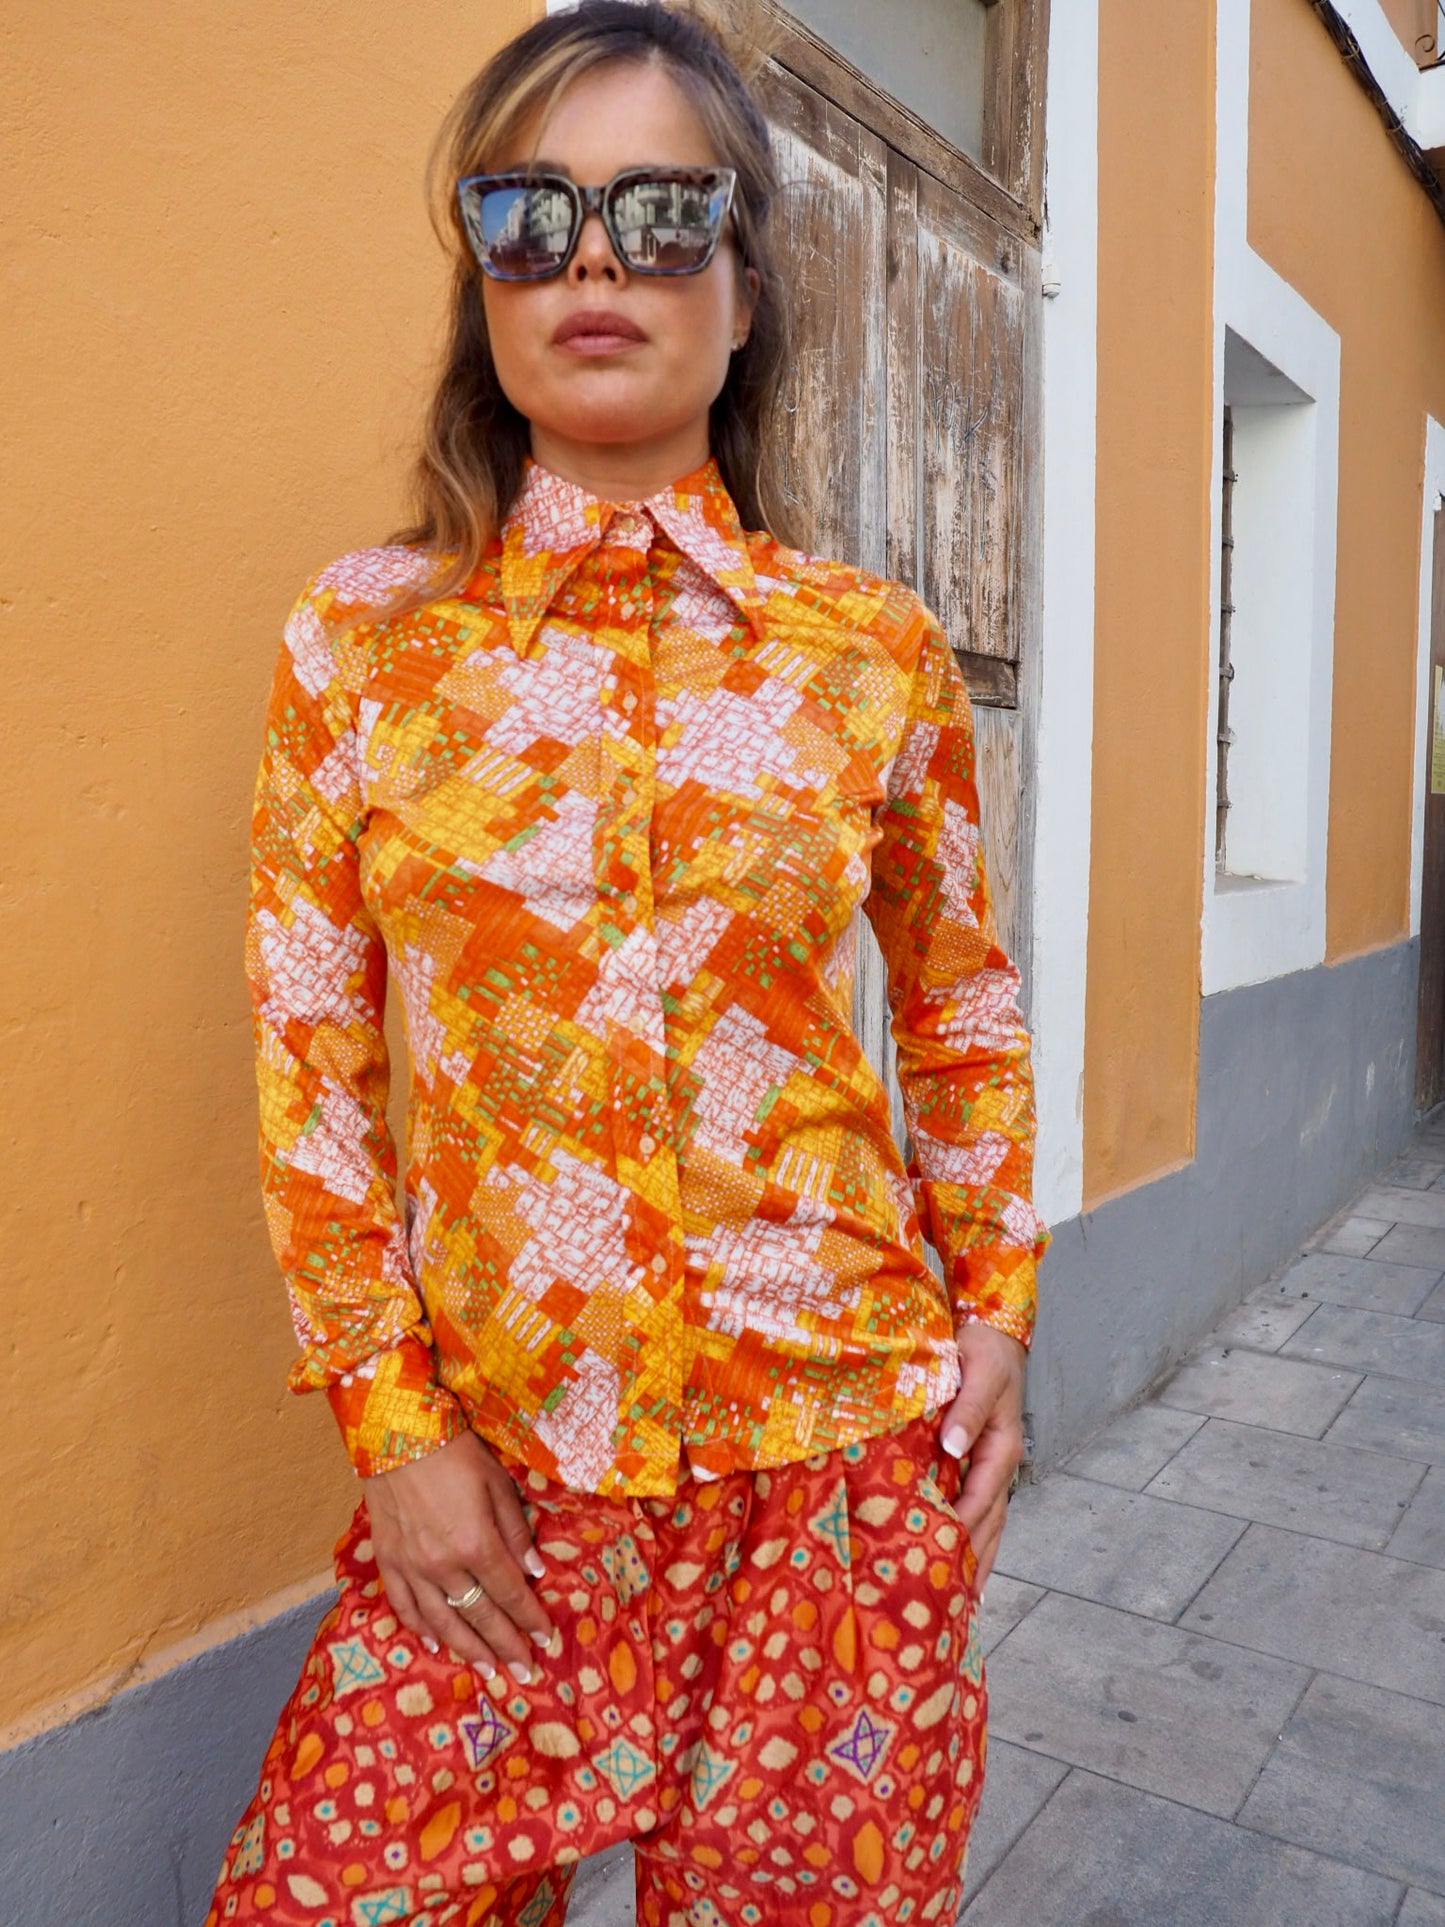 Original vintage 70’s cool printed orange shirt made in polyester with oversize collars